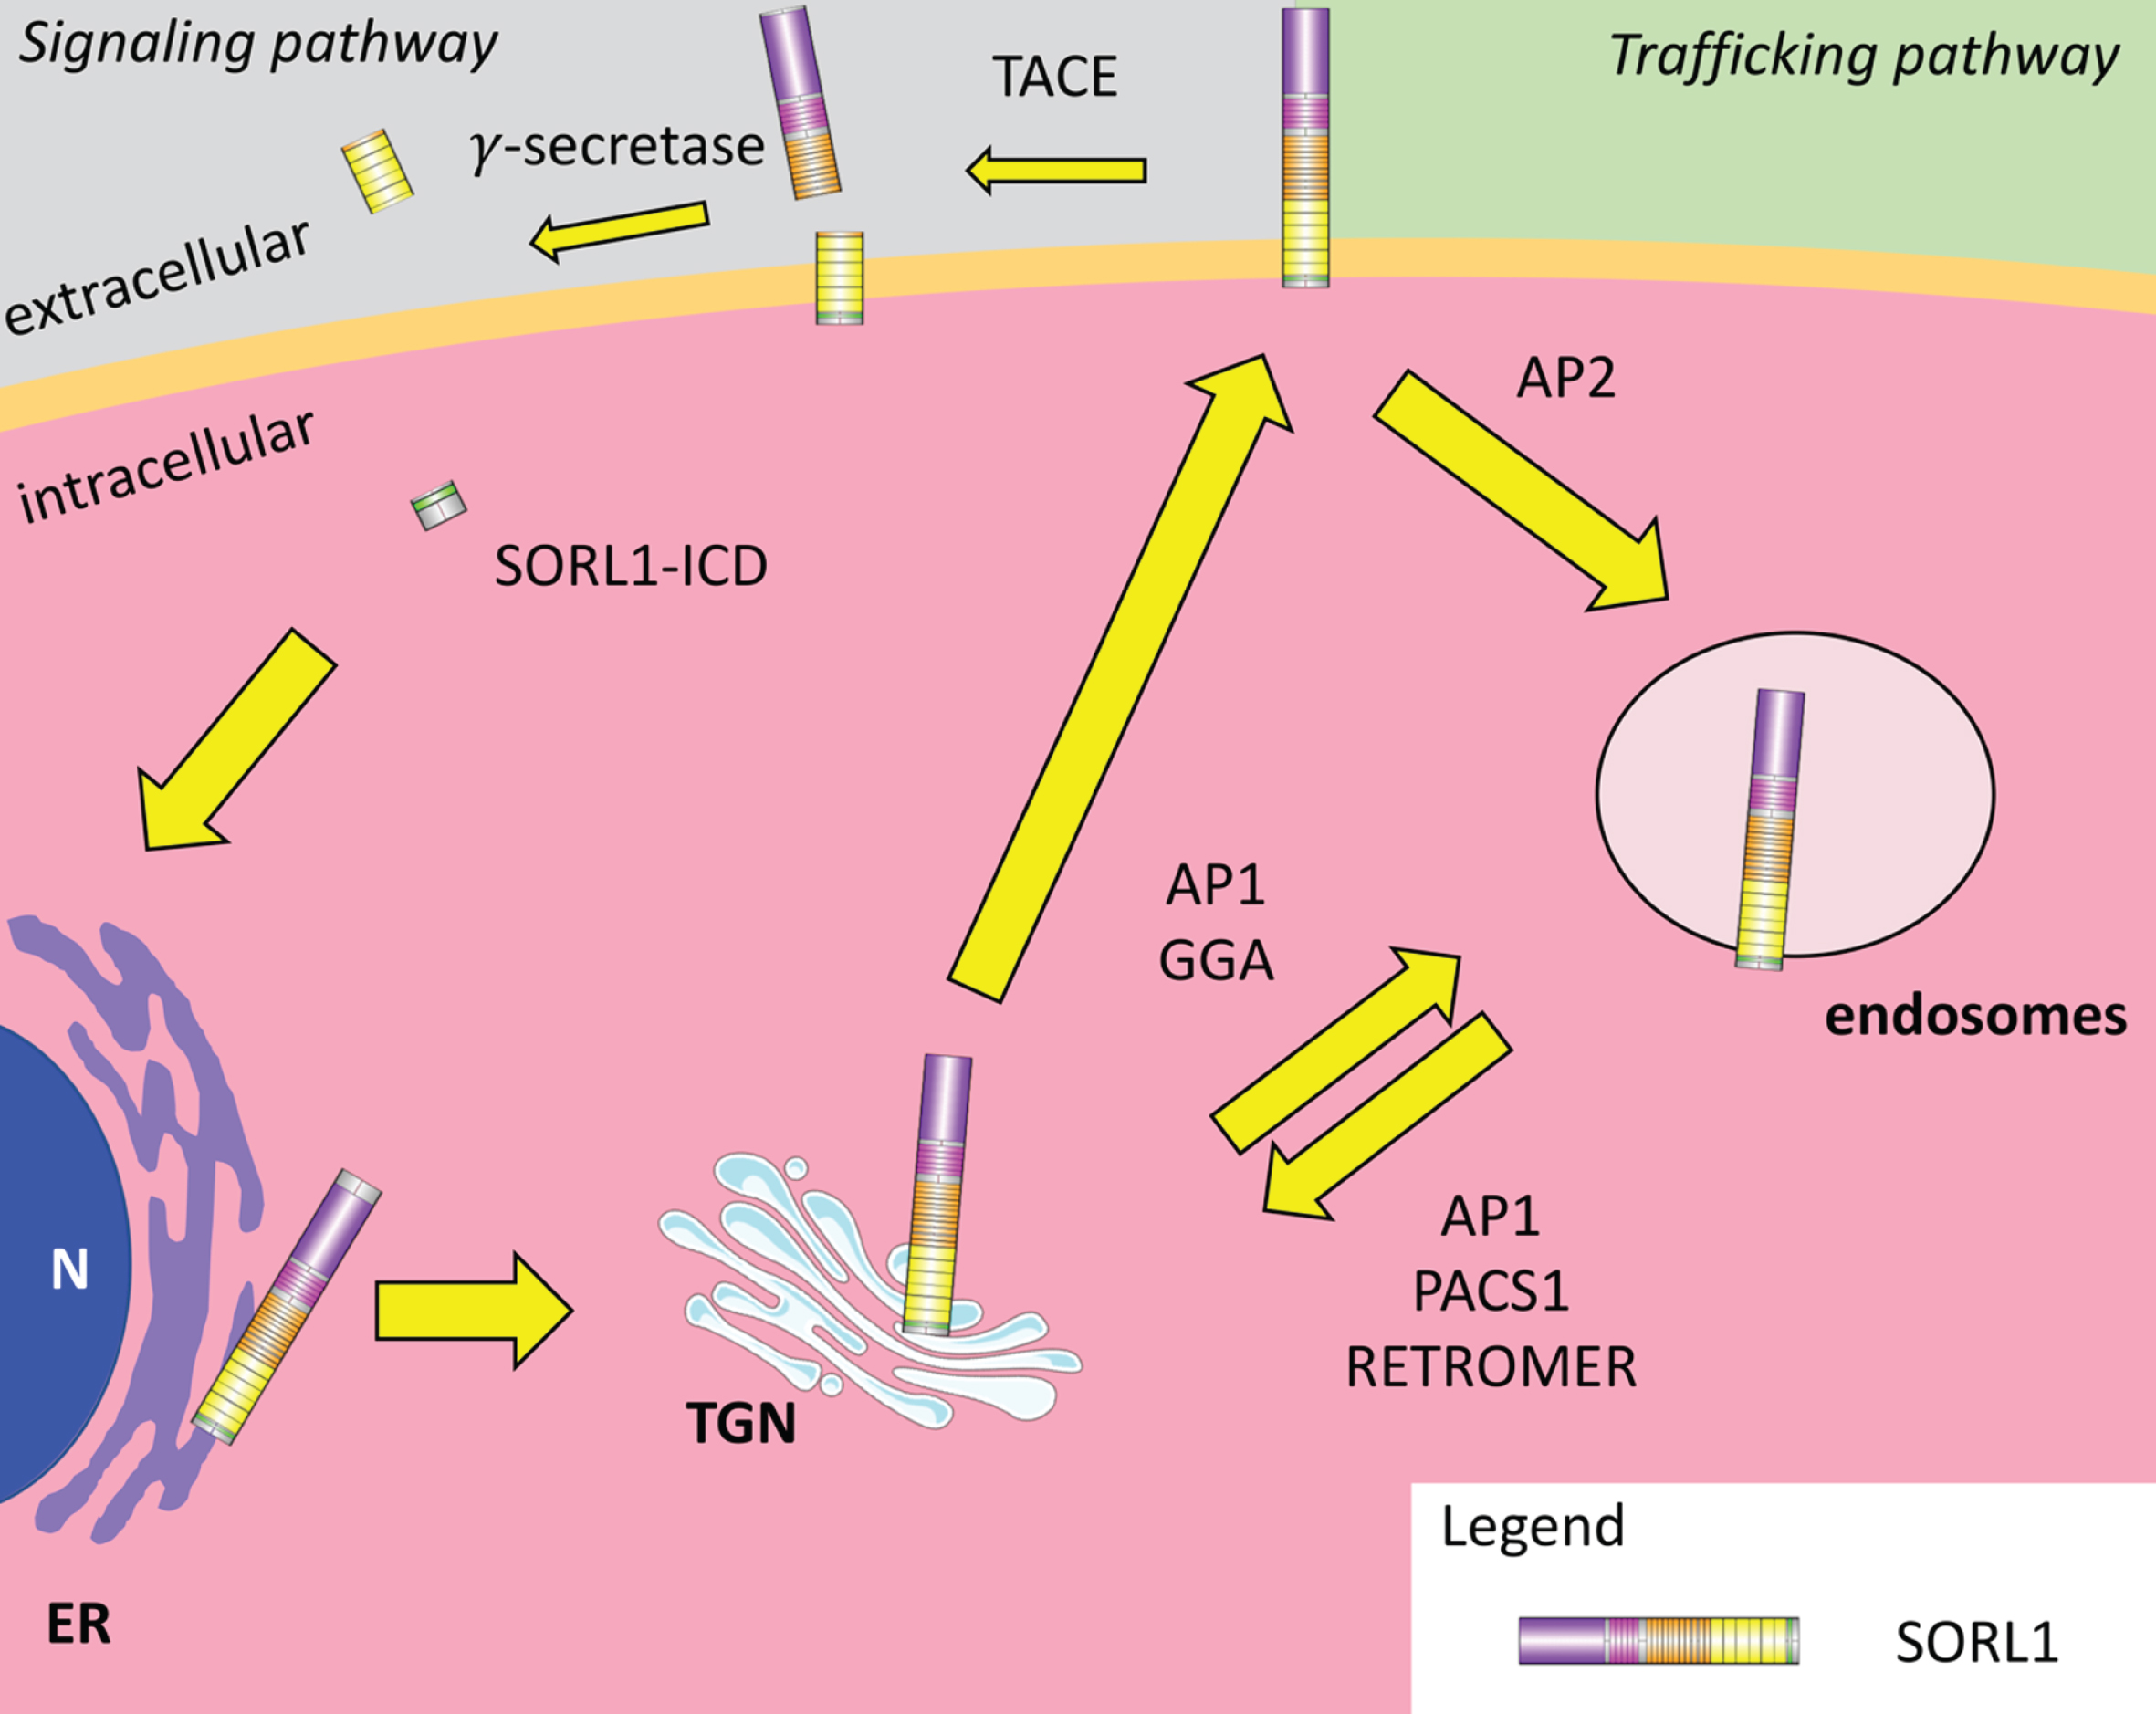 SORL1 trafficking pathways. Nascent SORL1 peptides are generated in the endoplasmic reticulum (ER) and follow the constituent secretory pathway to the trans-Golgi network (TGN) where the pro-peptide is removed by furin-mediated cleavage. This allows the receptor to move to the plasma membrane where it can follow a signaling pathway (left) or a trafficking pathway (right). In the signaling pathway, SORL1 is cleaved by tumor necrosis factor-A converting enzyme (TACE) and then by γ-secretase, releasing luminal fragments of SORL1 and a cytosolic SORL1 intracellular domain (SORL1-ICD). SORL1-ICD can move to the nucleus (N) and regulate transcription of as yet unknown genes. In the trafficking pathway, SORL1 can be internalized via clathrin-mediated endocytosis utilizing the chaperone clathrin adaptor protein 2 (AP2). Internalized SORL1 receptors then shuttle between the TGN and the endosomes, guided by cytosolic adaptor proteins such as adaptor protein 1 (AP1), phosphofurin acidic cluster sorting protein (PACS1), Golgi-localizing, γ-adaptin ear homology domain ARF-interaction (GGA) and the retromer complex.